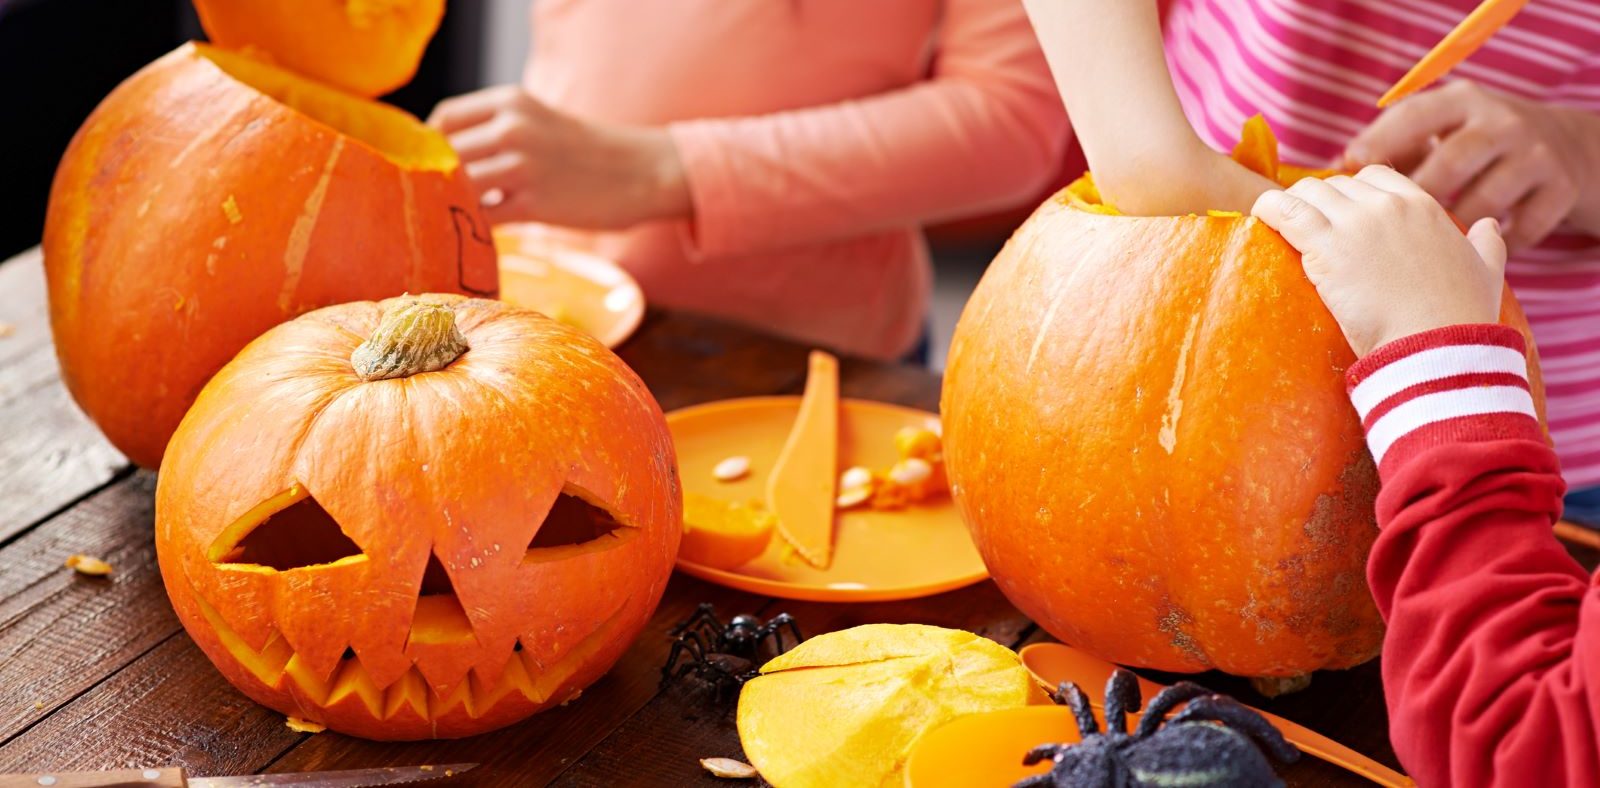 Every year, it’s estimated that about 2,000 people are injured pumpkin carving. Learn how to protect yourself and your family.